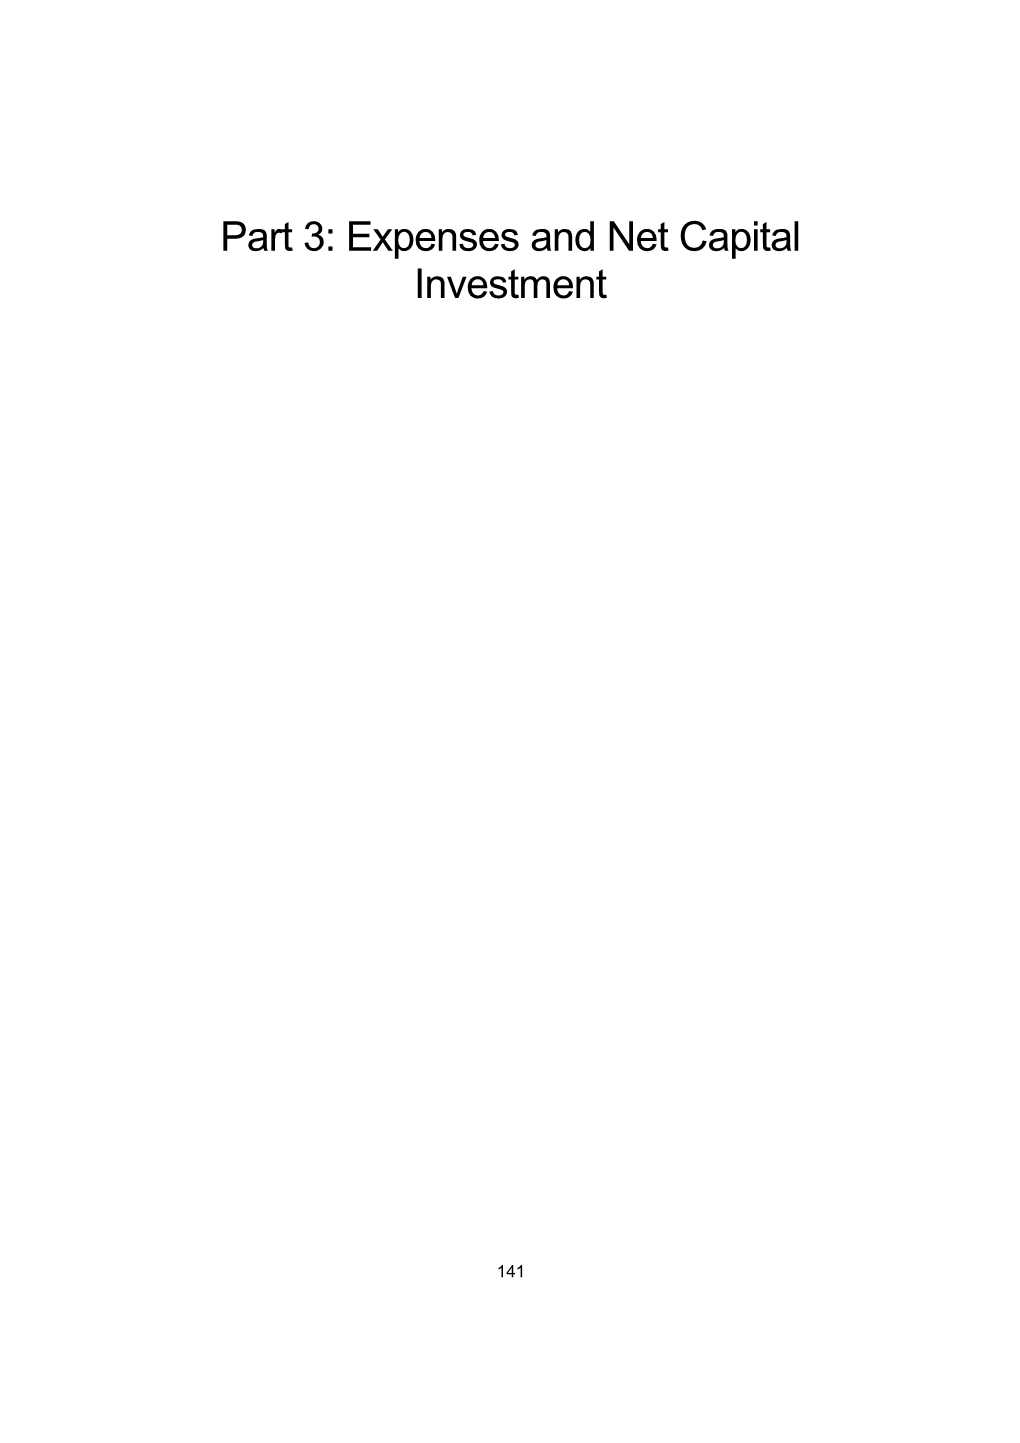 Budget 2017-18 - Agency Resourcing, Budget Paper No. 4 - Part 3: Expenses and Net Capital